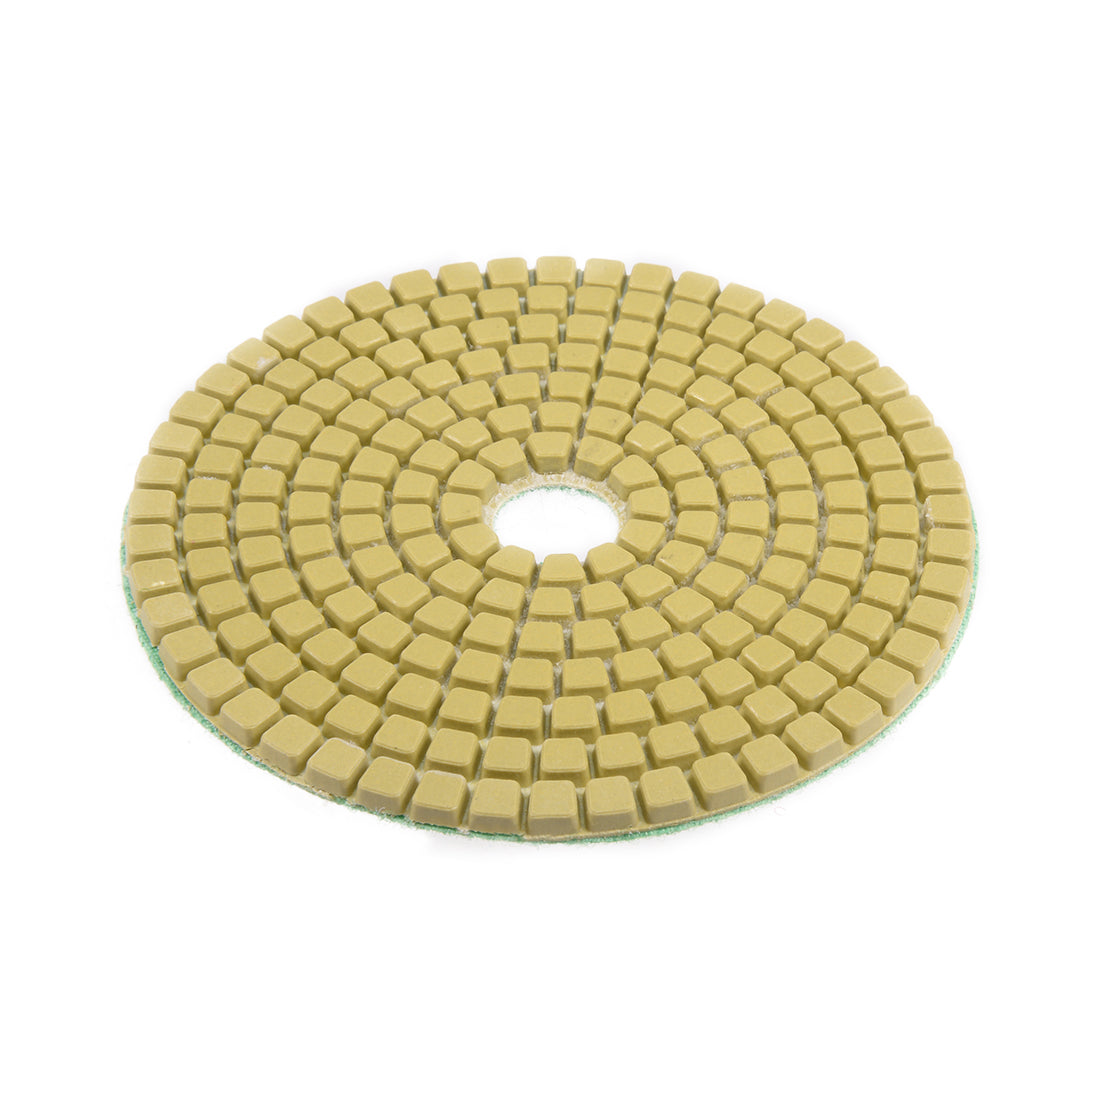 uxcell Uxcell Diamond Polishing Sanding Grinding Pads Discs 4 Inch Grit 1000 1 Pcs for granito Concrete Stone Marble